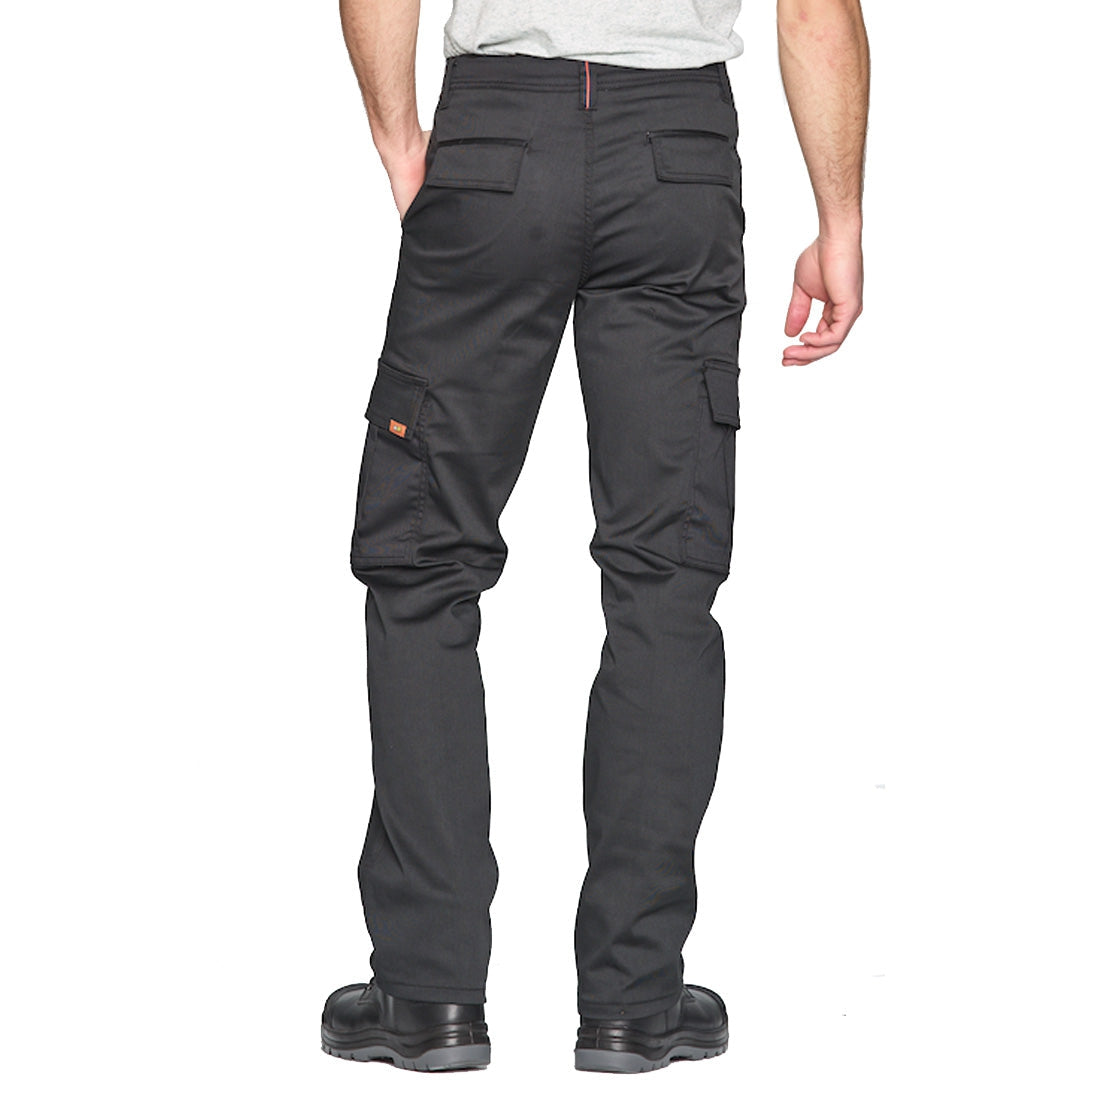 OR Stretch work pants (Cargo)